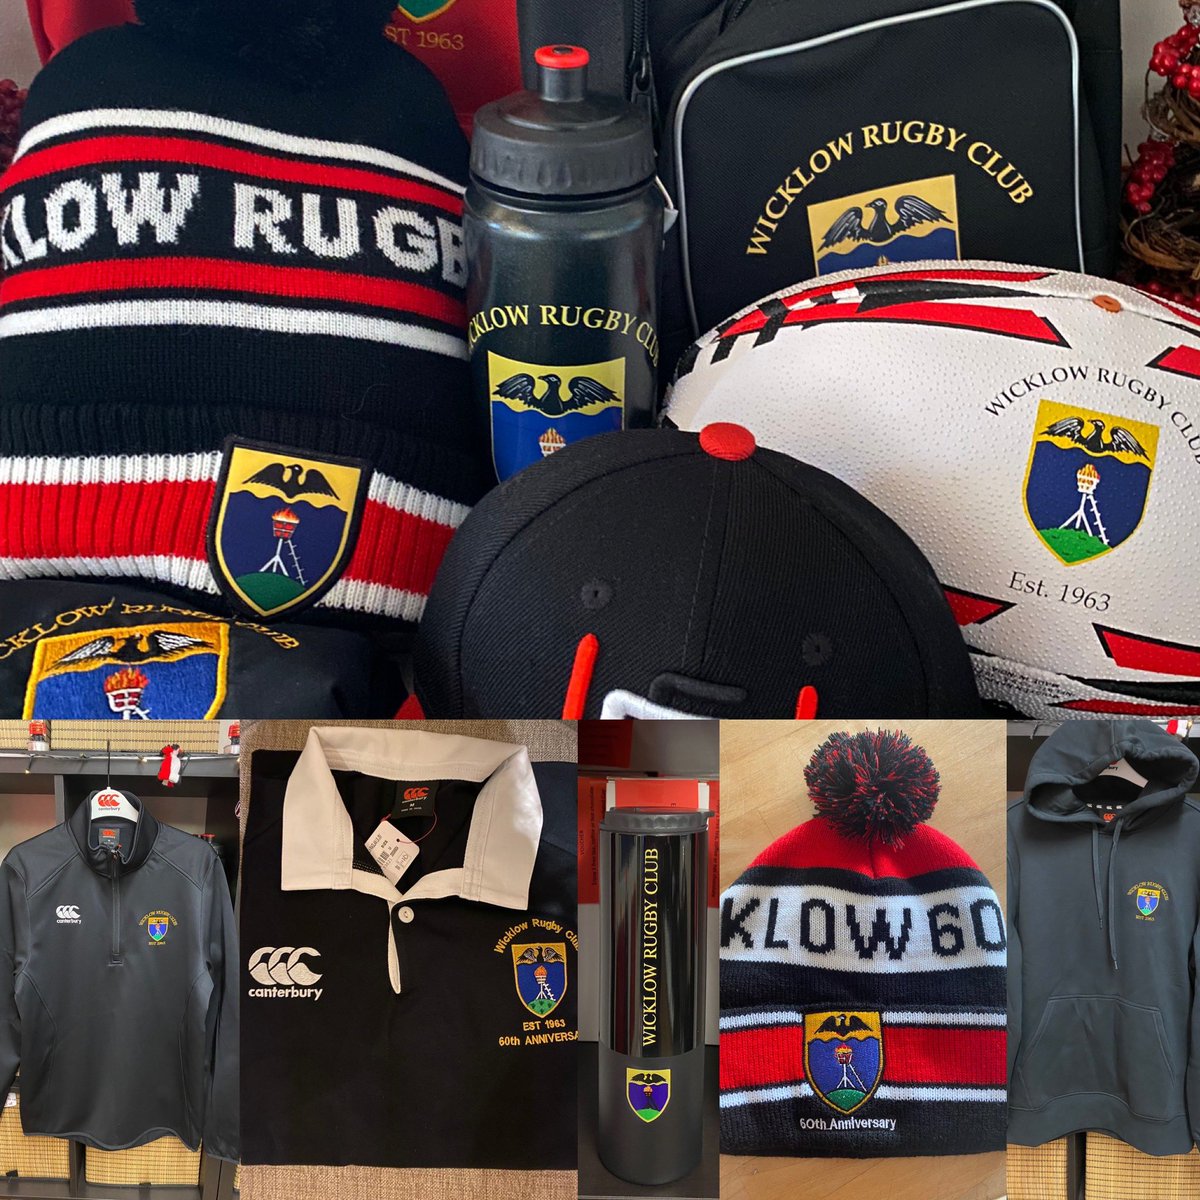 The Club Shop will be closing for the end of the season this coming Thursday May 2nd and will reopen at the end of August. We are open this week on Wednesday 6pm- 7.30pm and Thursday 6.30-7.30pm. Wishing you all a great summer from the WRFC Shop Commitee 🏉⚫️🔴⚪️